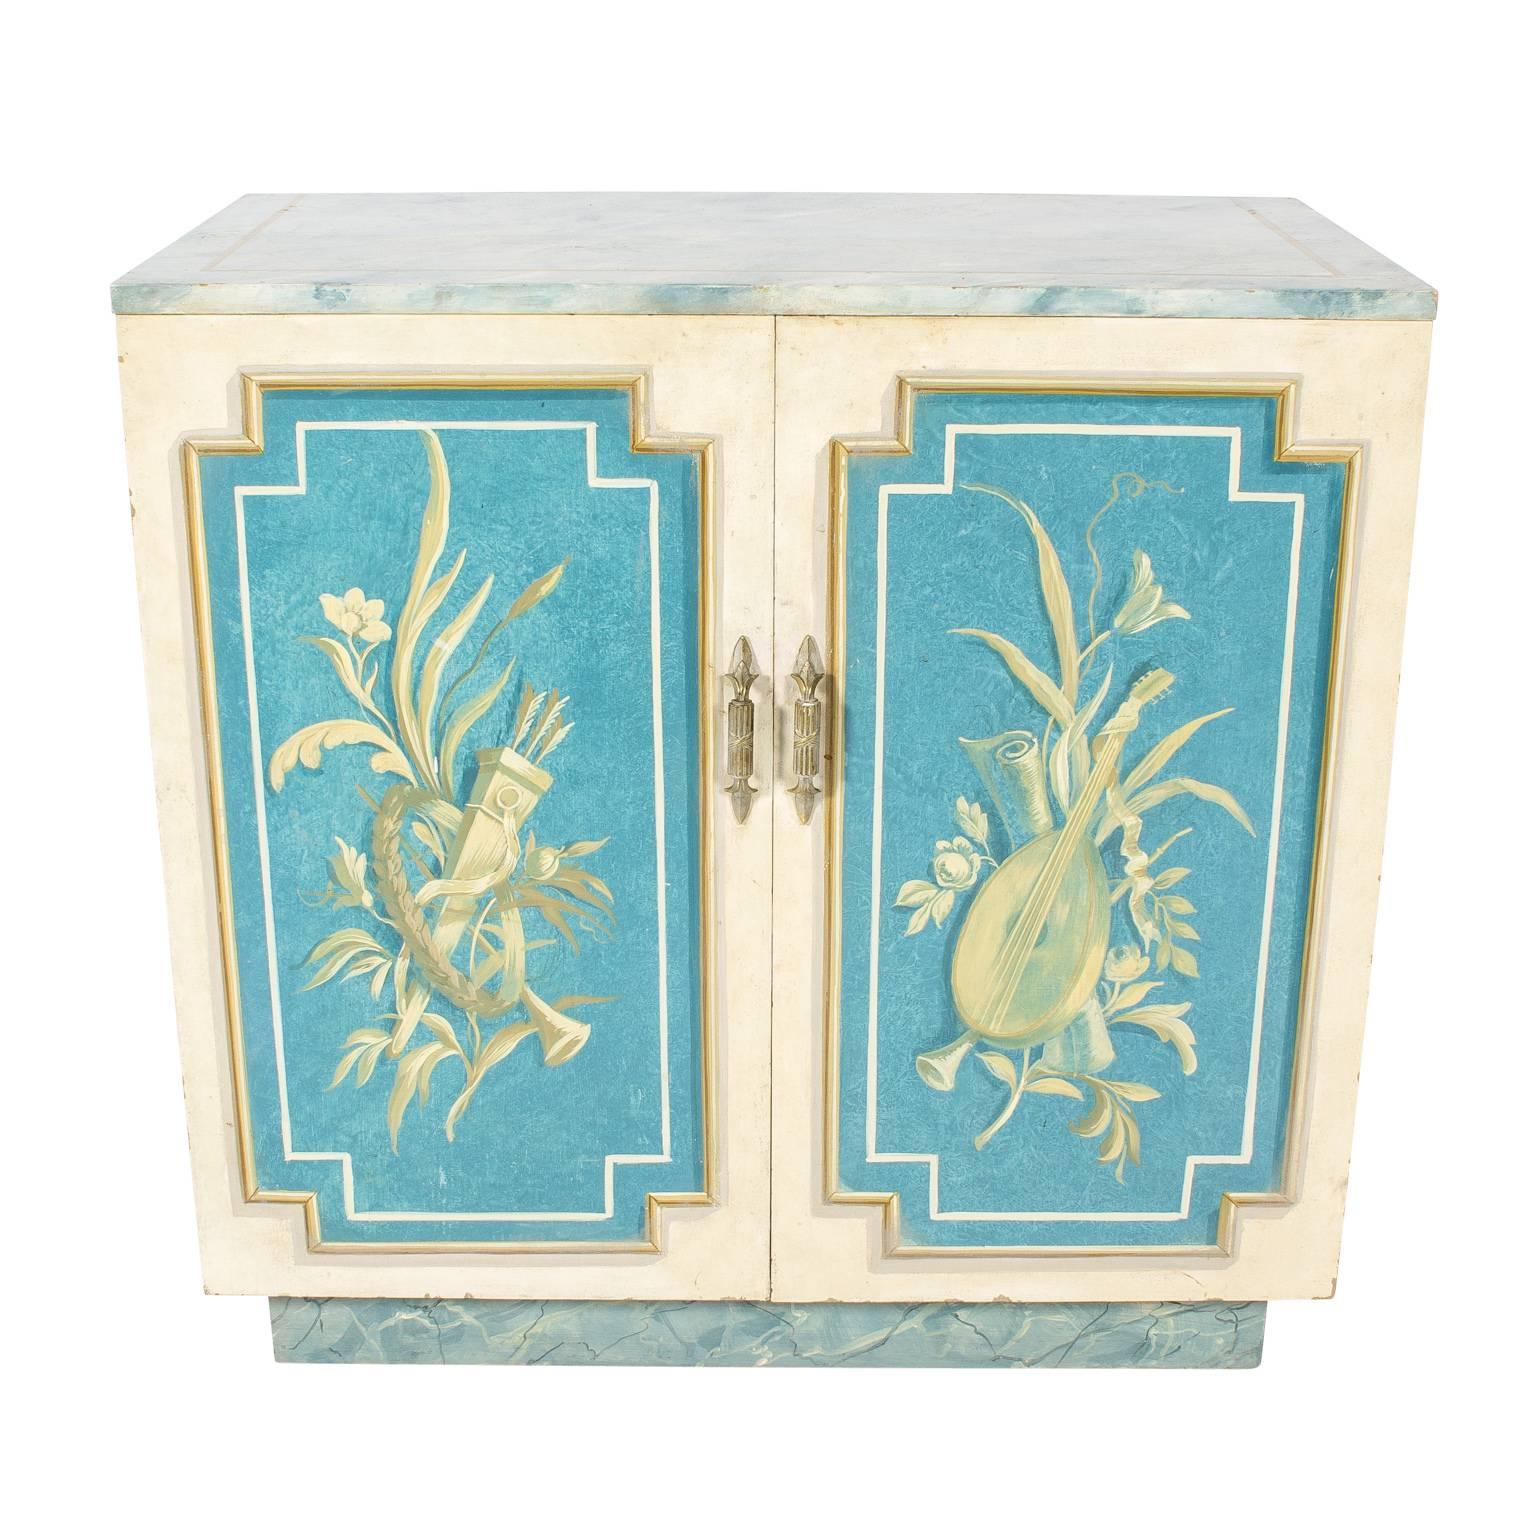 Pair of blue and white faux painted cabinets with music and flora motifs painted throughout.